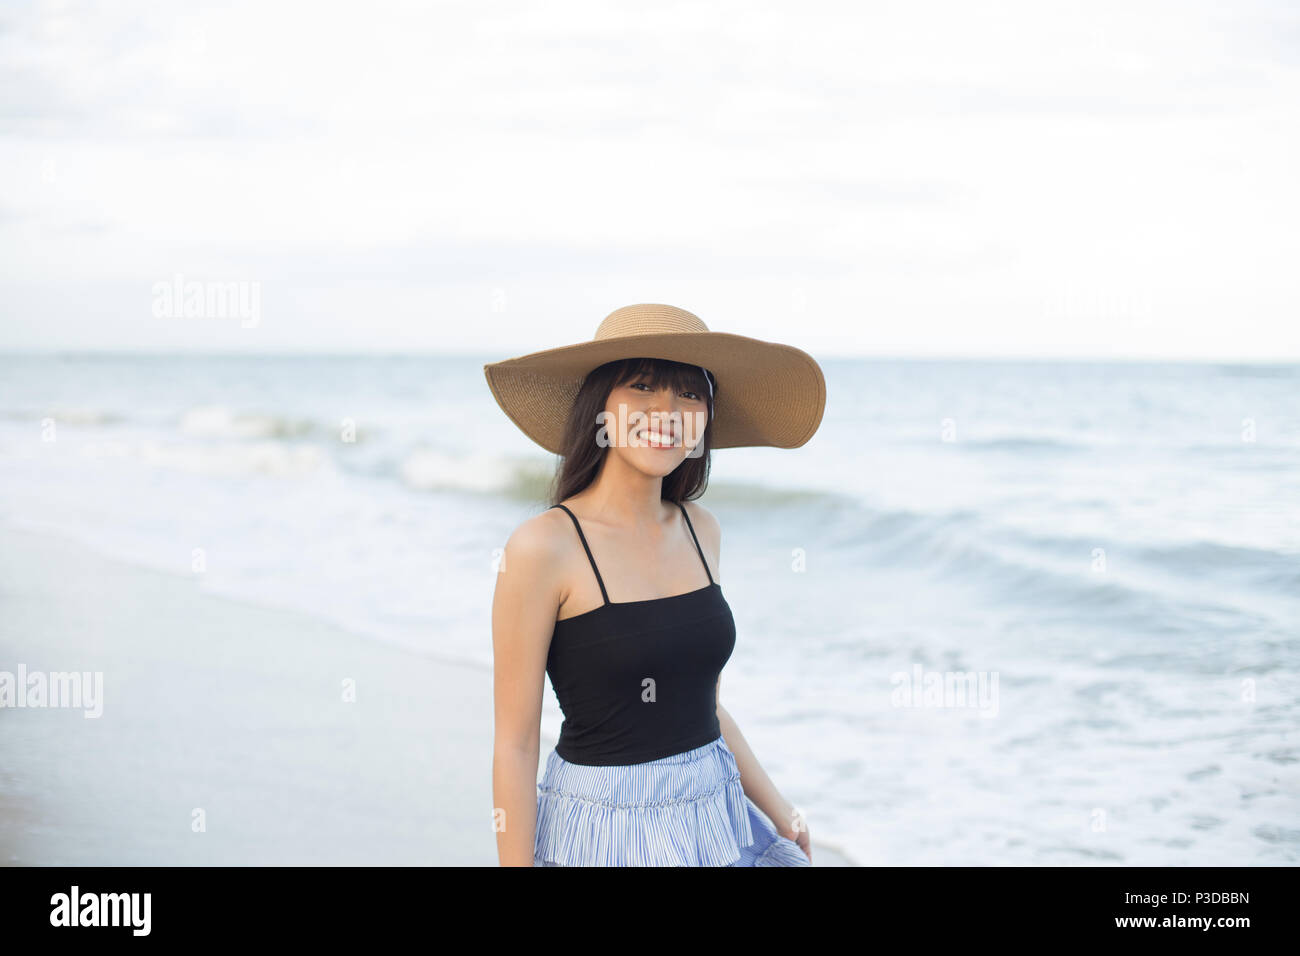 Young girl enjoy and happy her relaxing on the beach, Hua Hin, Thailand Stock Photo